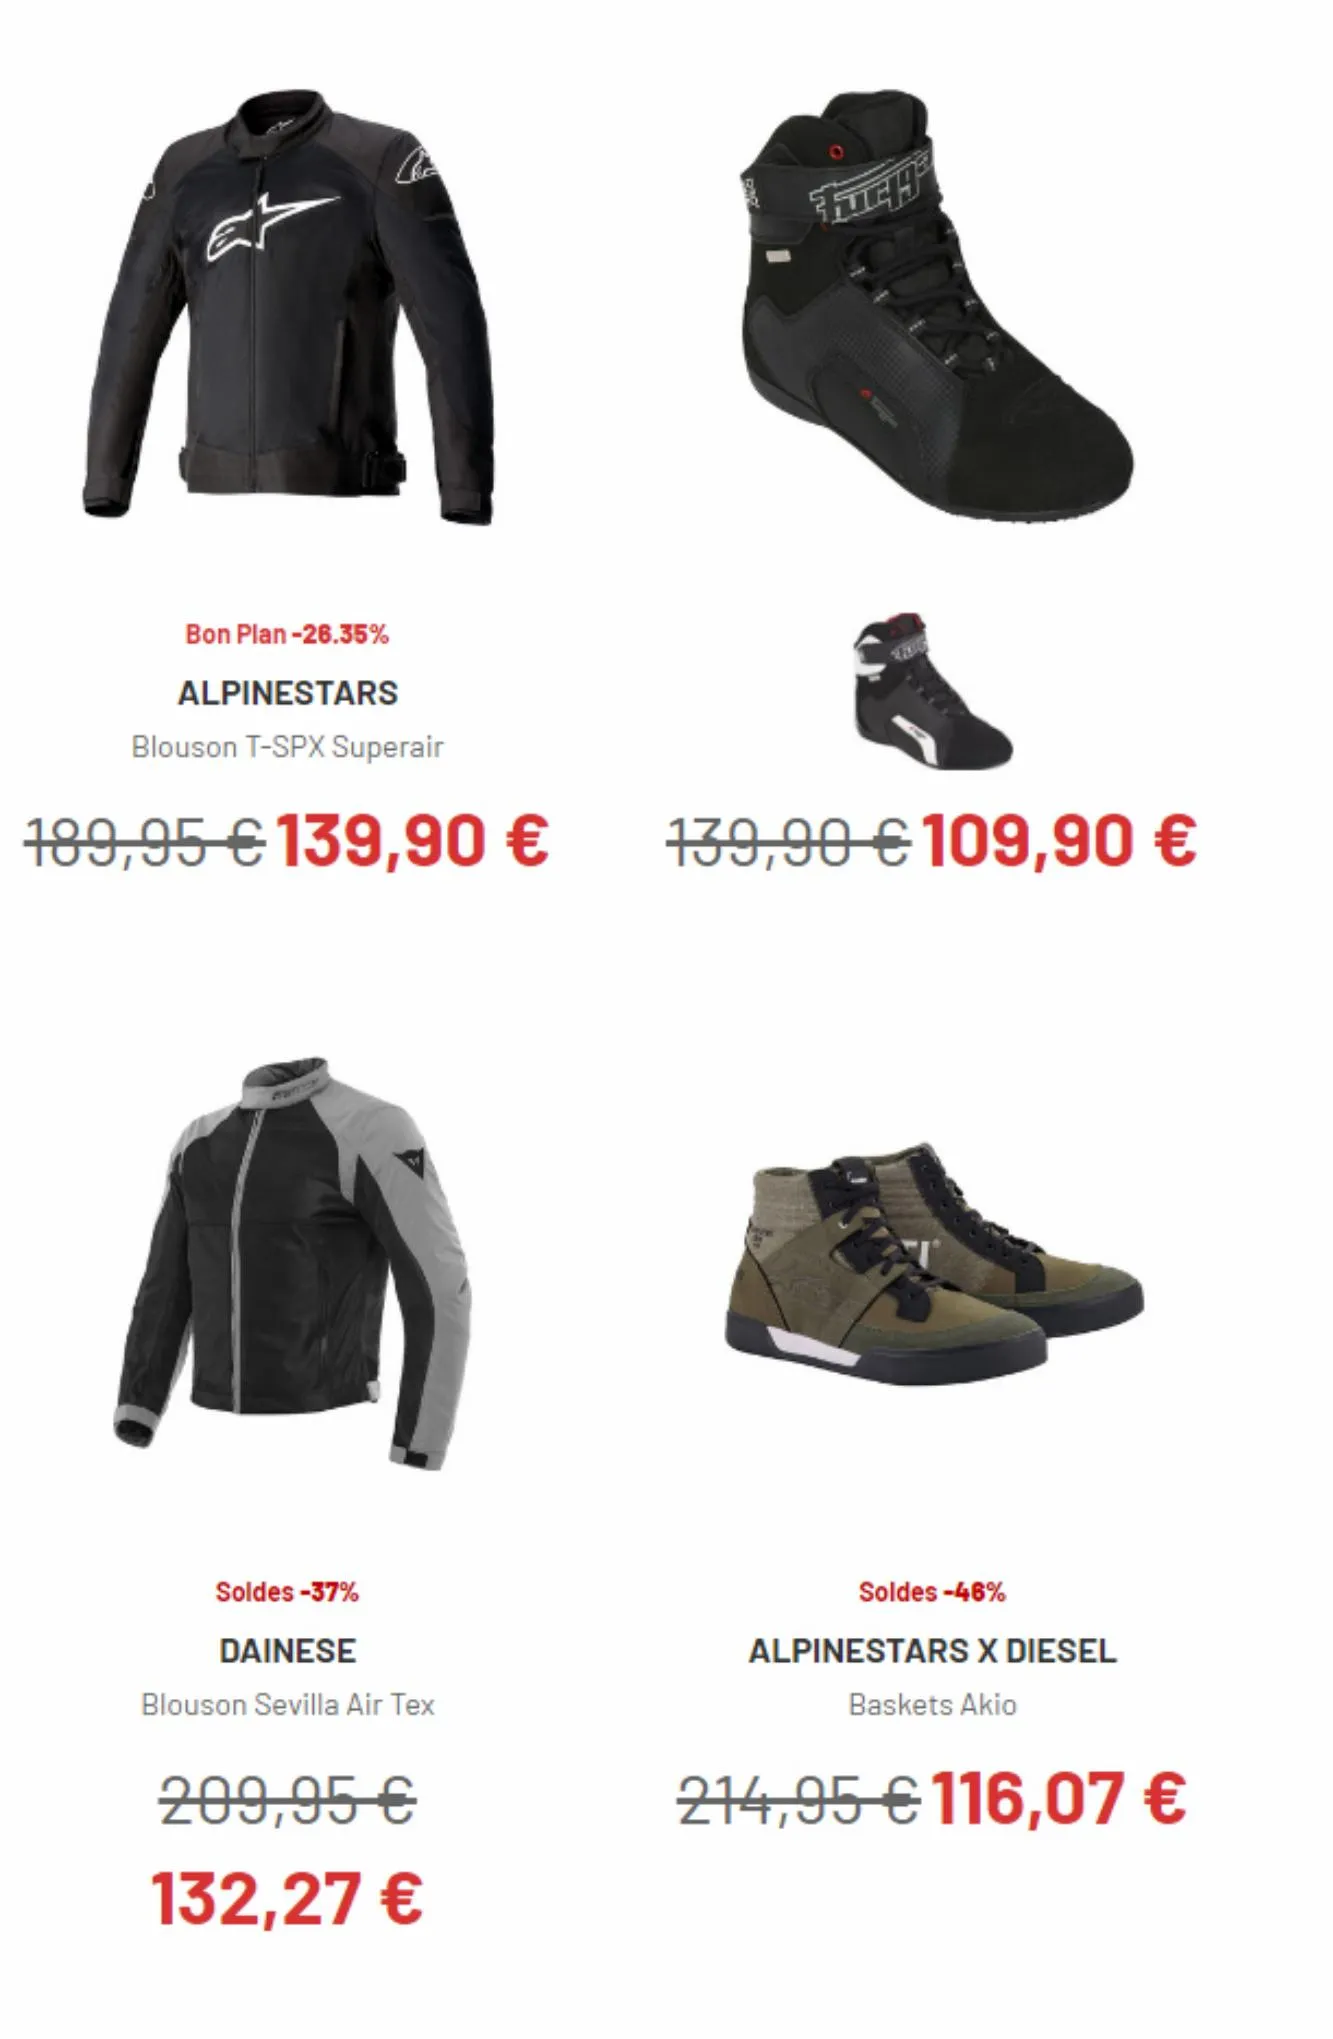 Catalogue SOLDES 80% Dafy Moto, page 00003